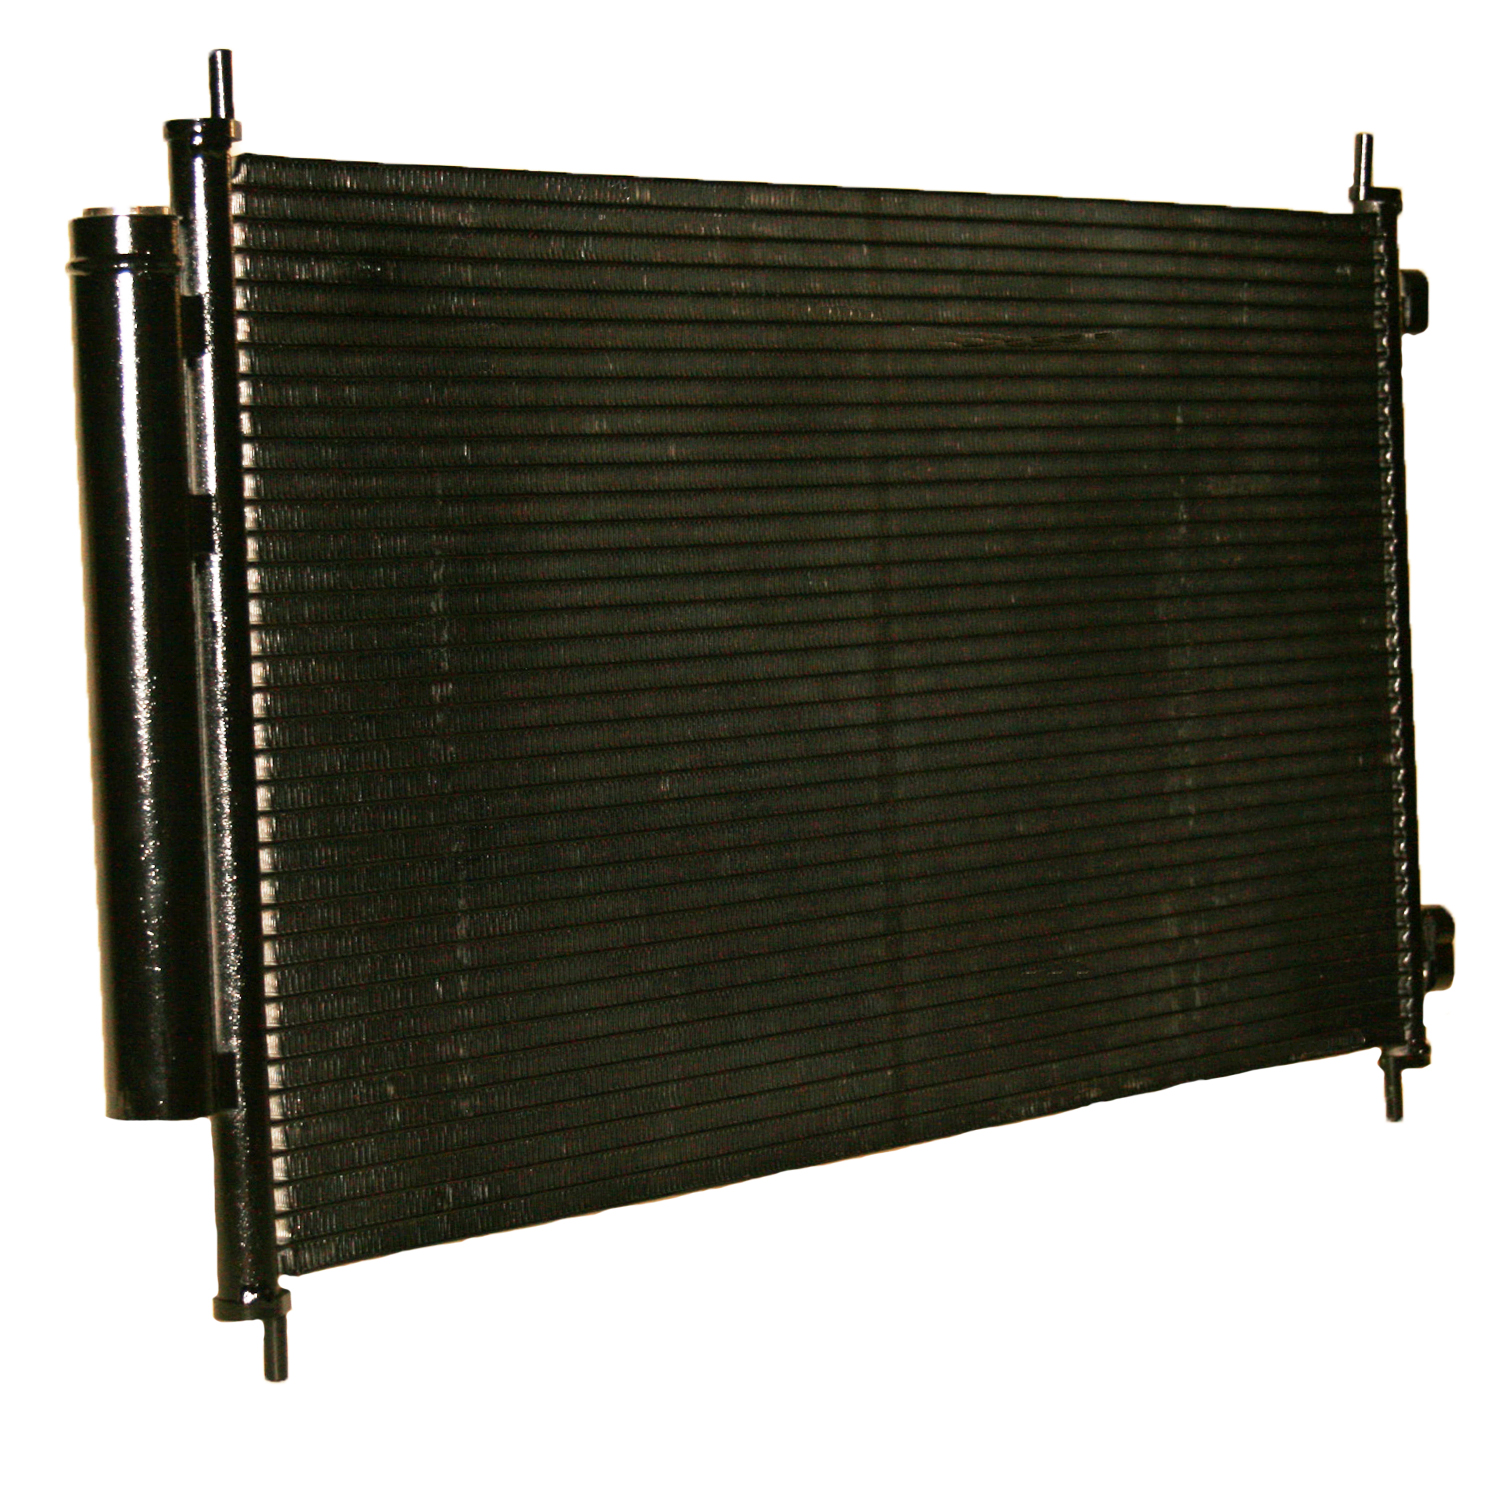 TCW Condenser 44-3599 New Product Image field_60b6a13a6e67c